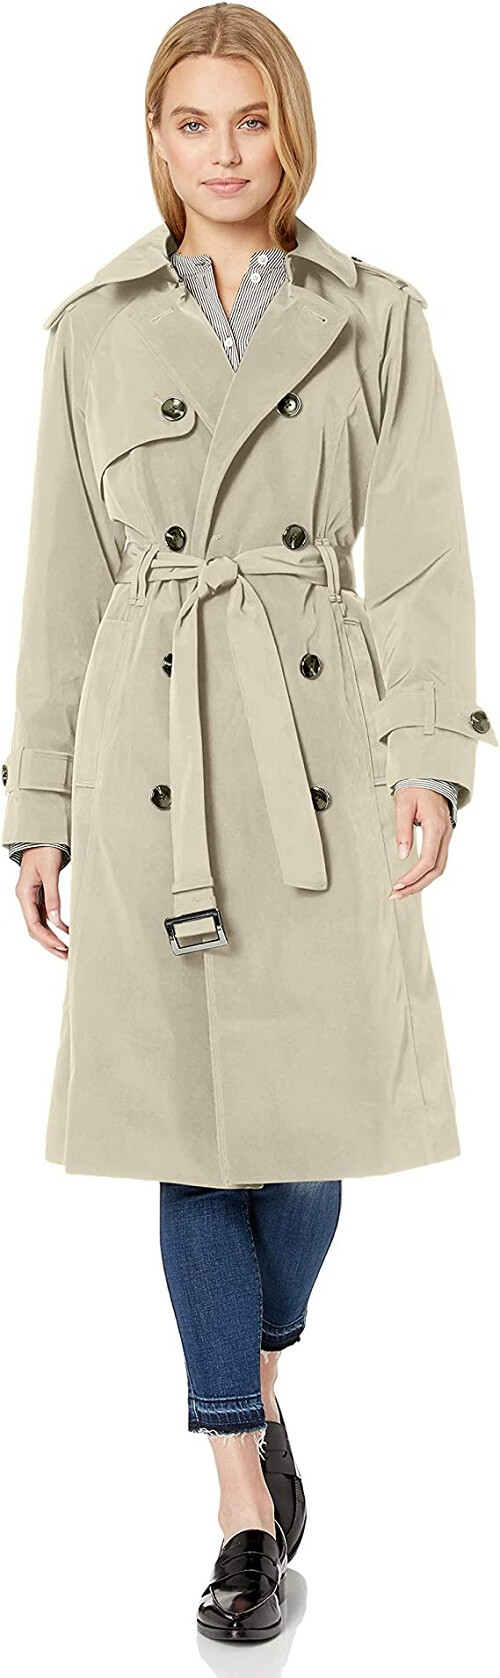 Formal and business settings require a jacket that exudes elegance and professionalism. When it comes to fall outerwear for such occasions, trench coats are a timeless choice.